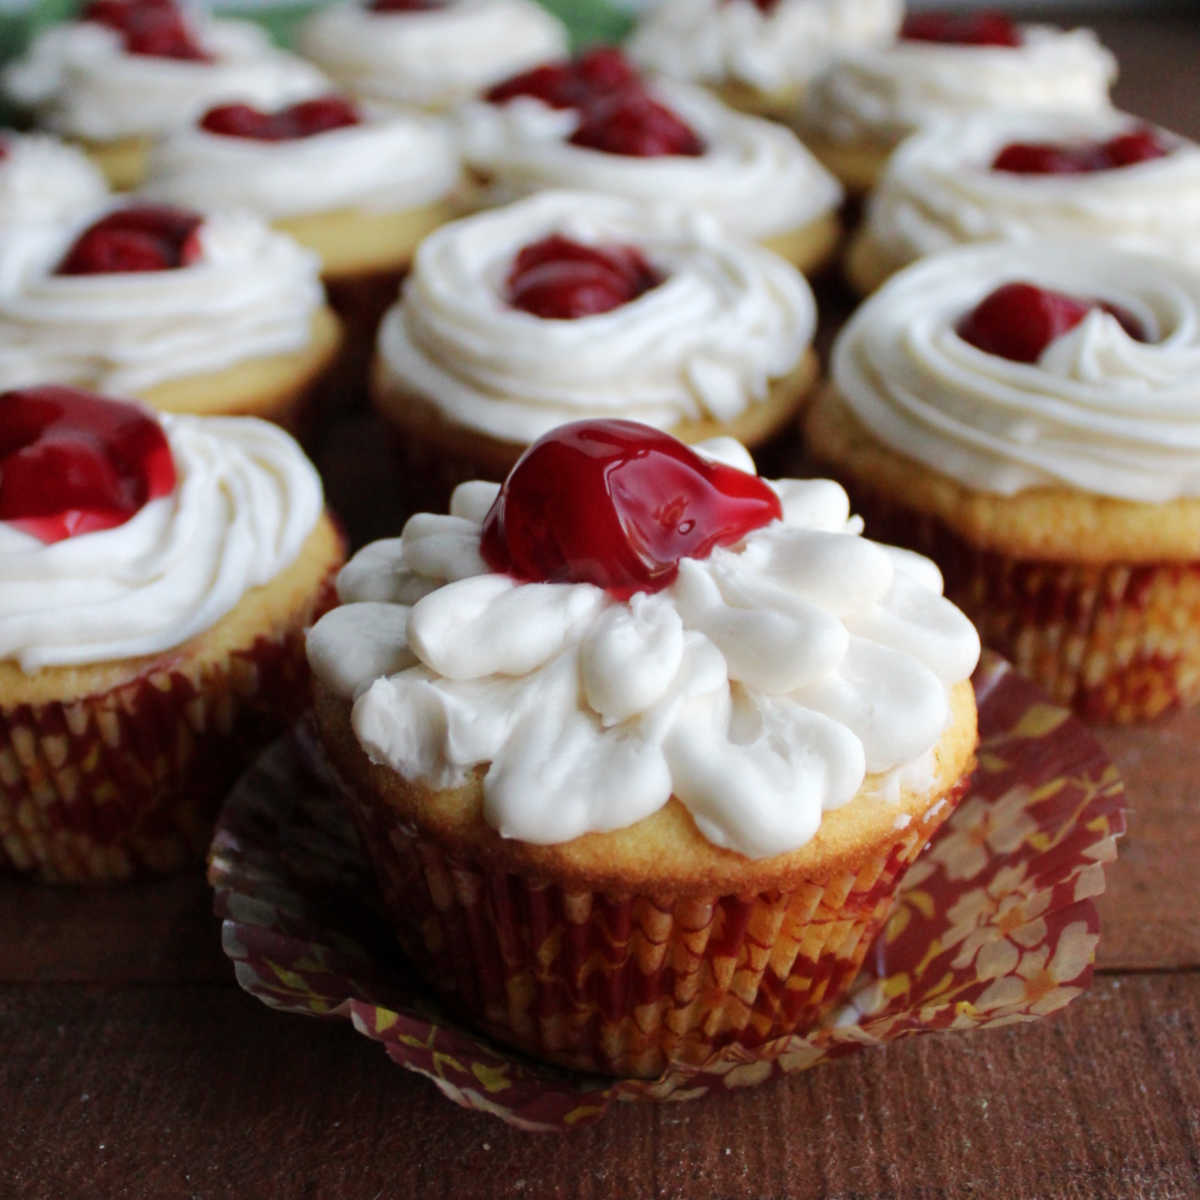 Cupcakes topped with white buttercream frosting and cherry pie filling.